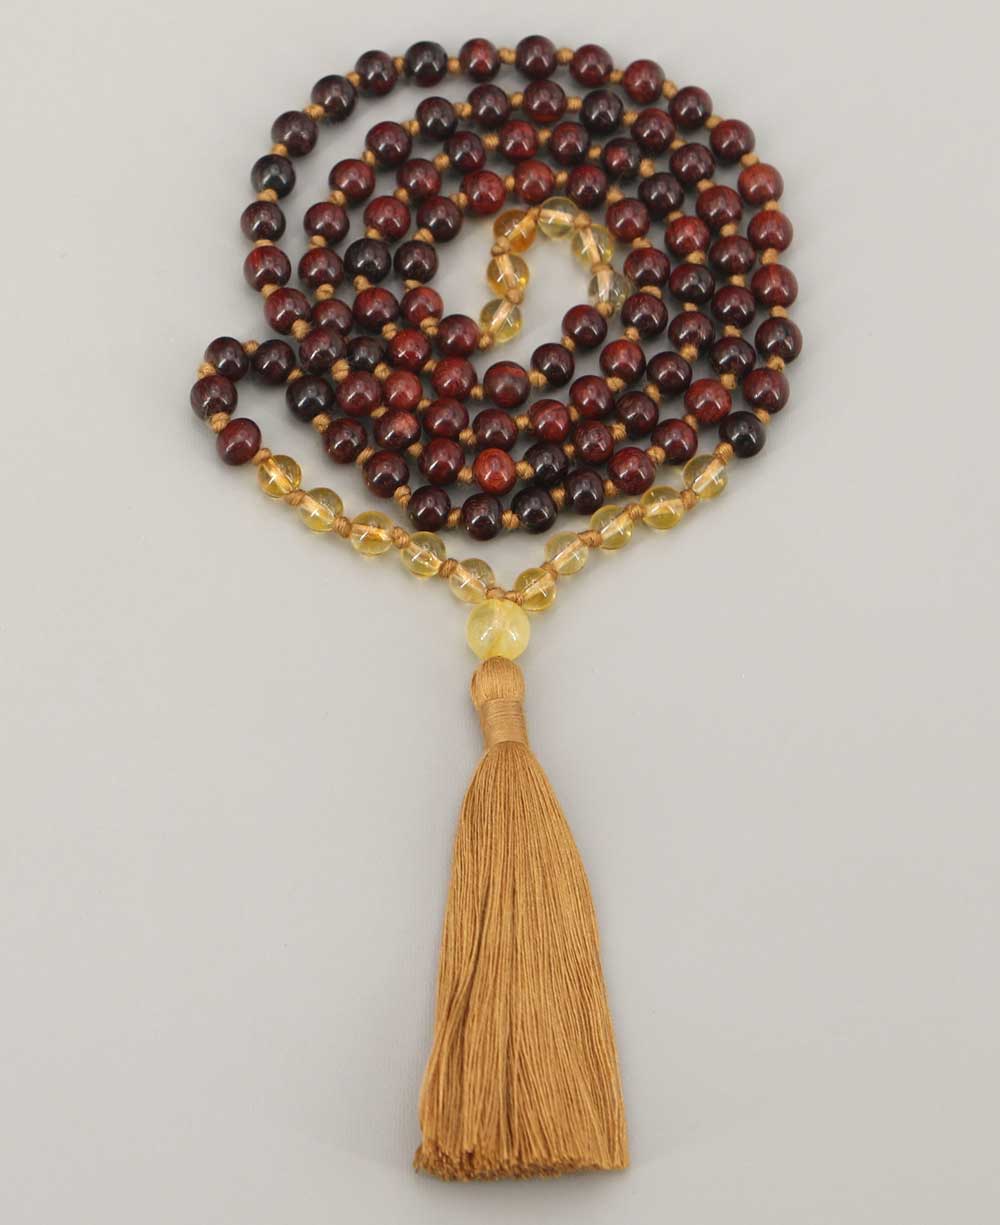 Rosewood and Citrine 108 Beads Meditation Mala, Knotted - Prayer Beads